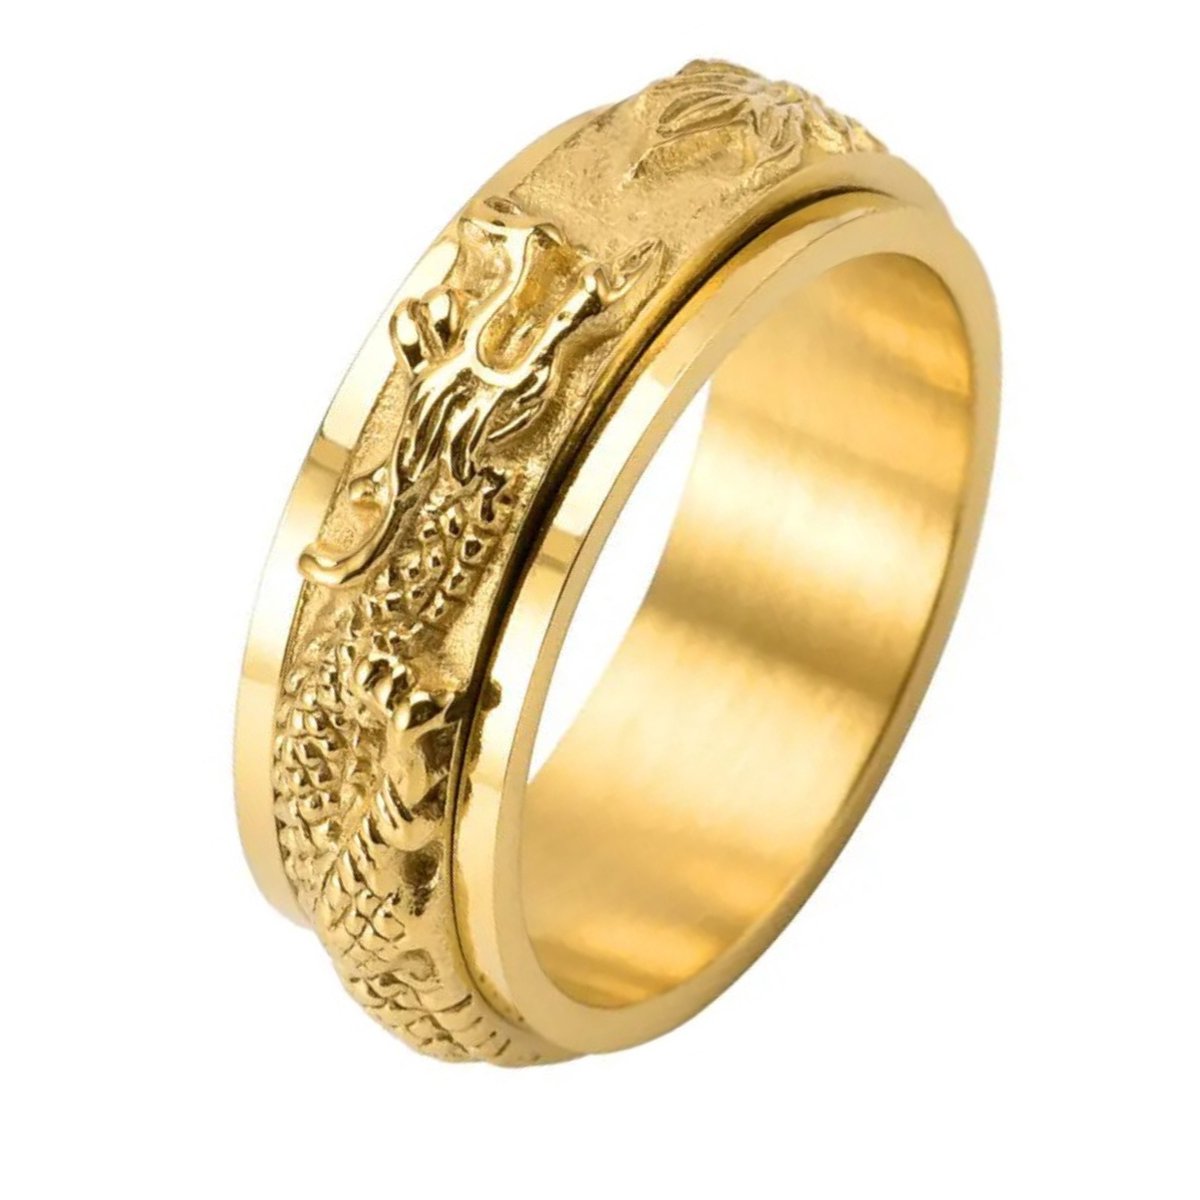 Anxiety Ring - (Draak) - Stress Ring - Fidget Ring - Anxiety Ring For Finger - Draaibare Ring - Spinning Ring - Goud - (17.50 mm / maat 55)